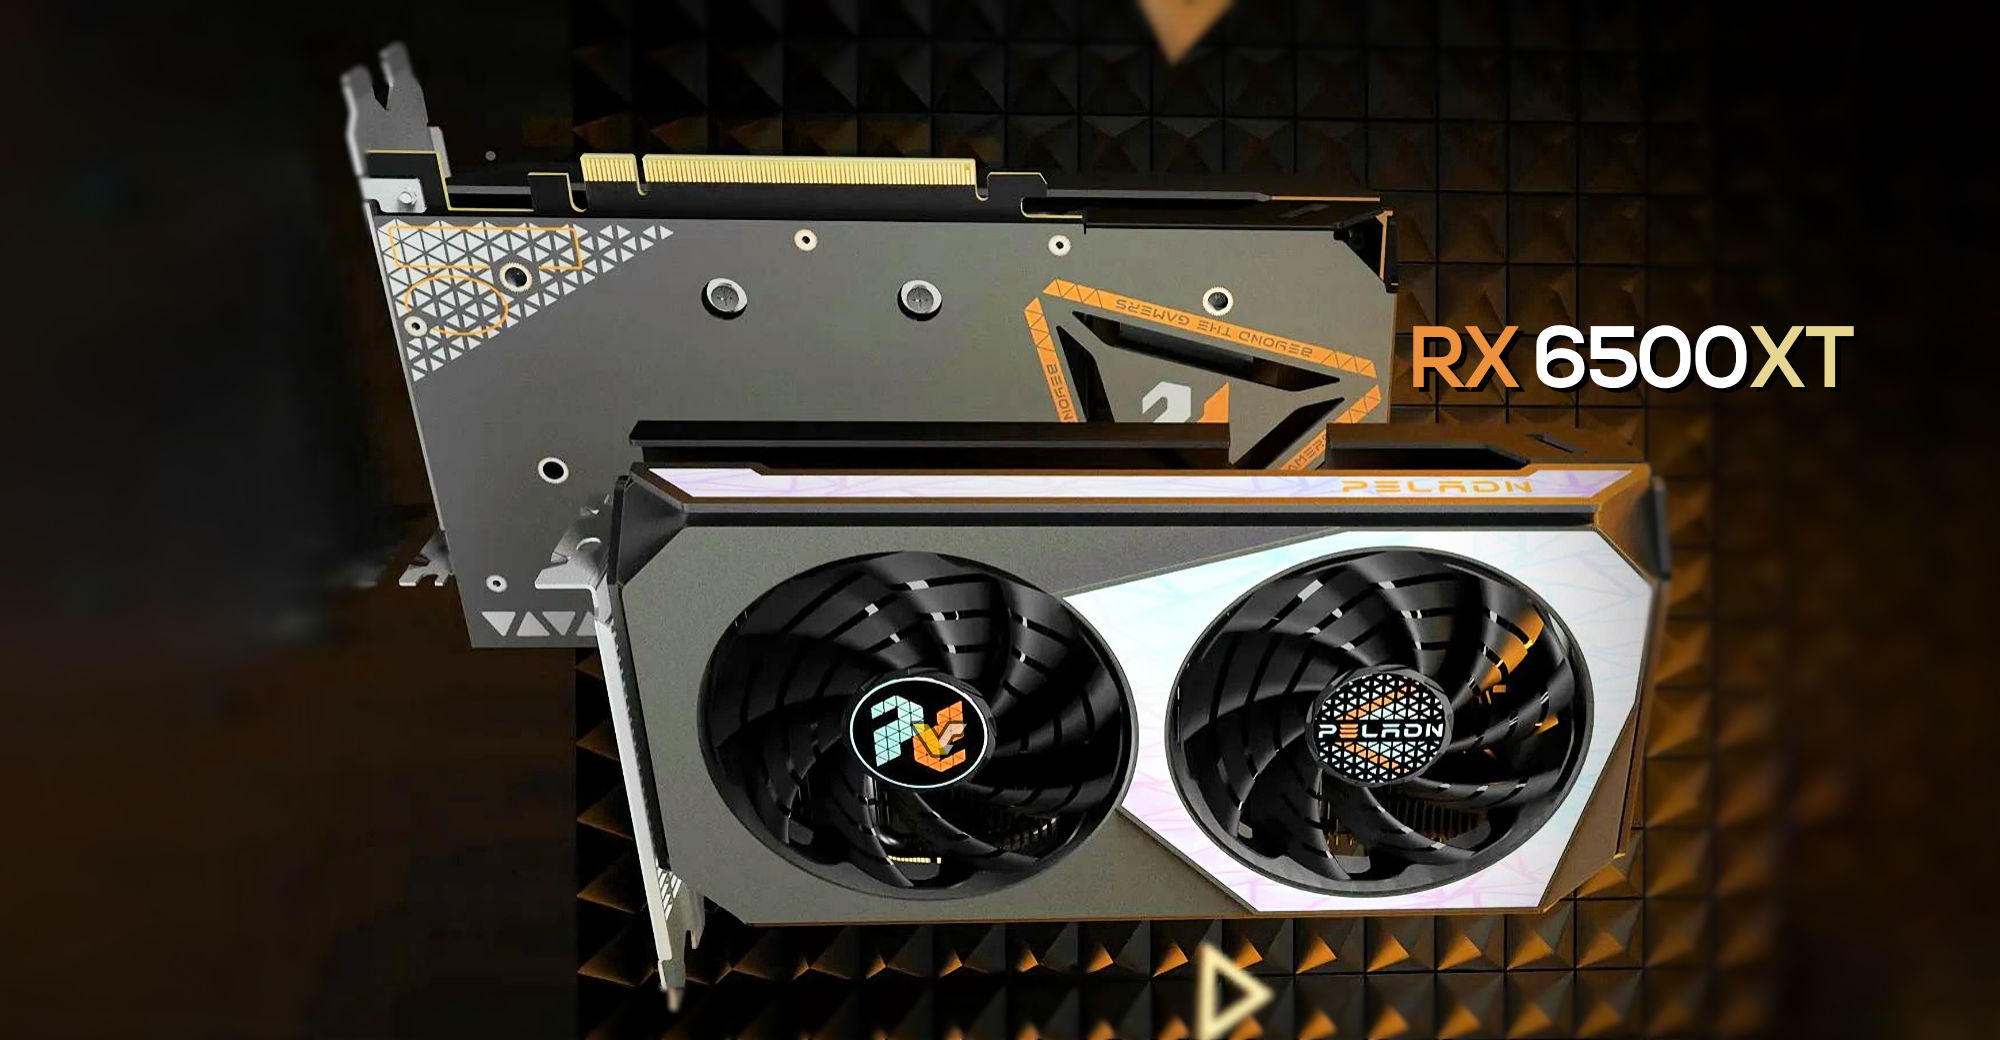 Chinese PELADN launches Radeon RX 6500 XT ARMOR with 8GB memory